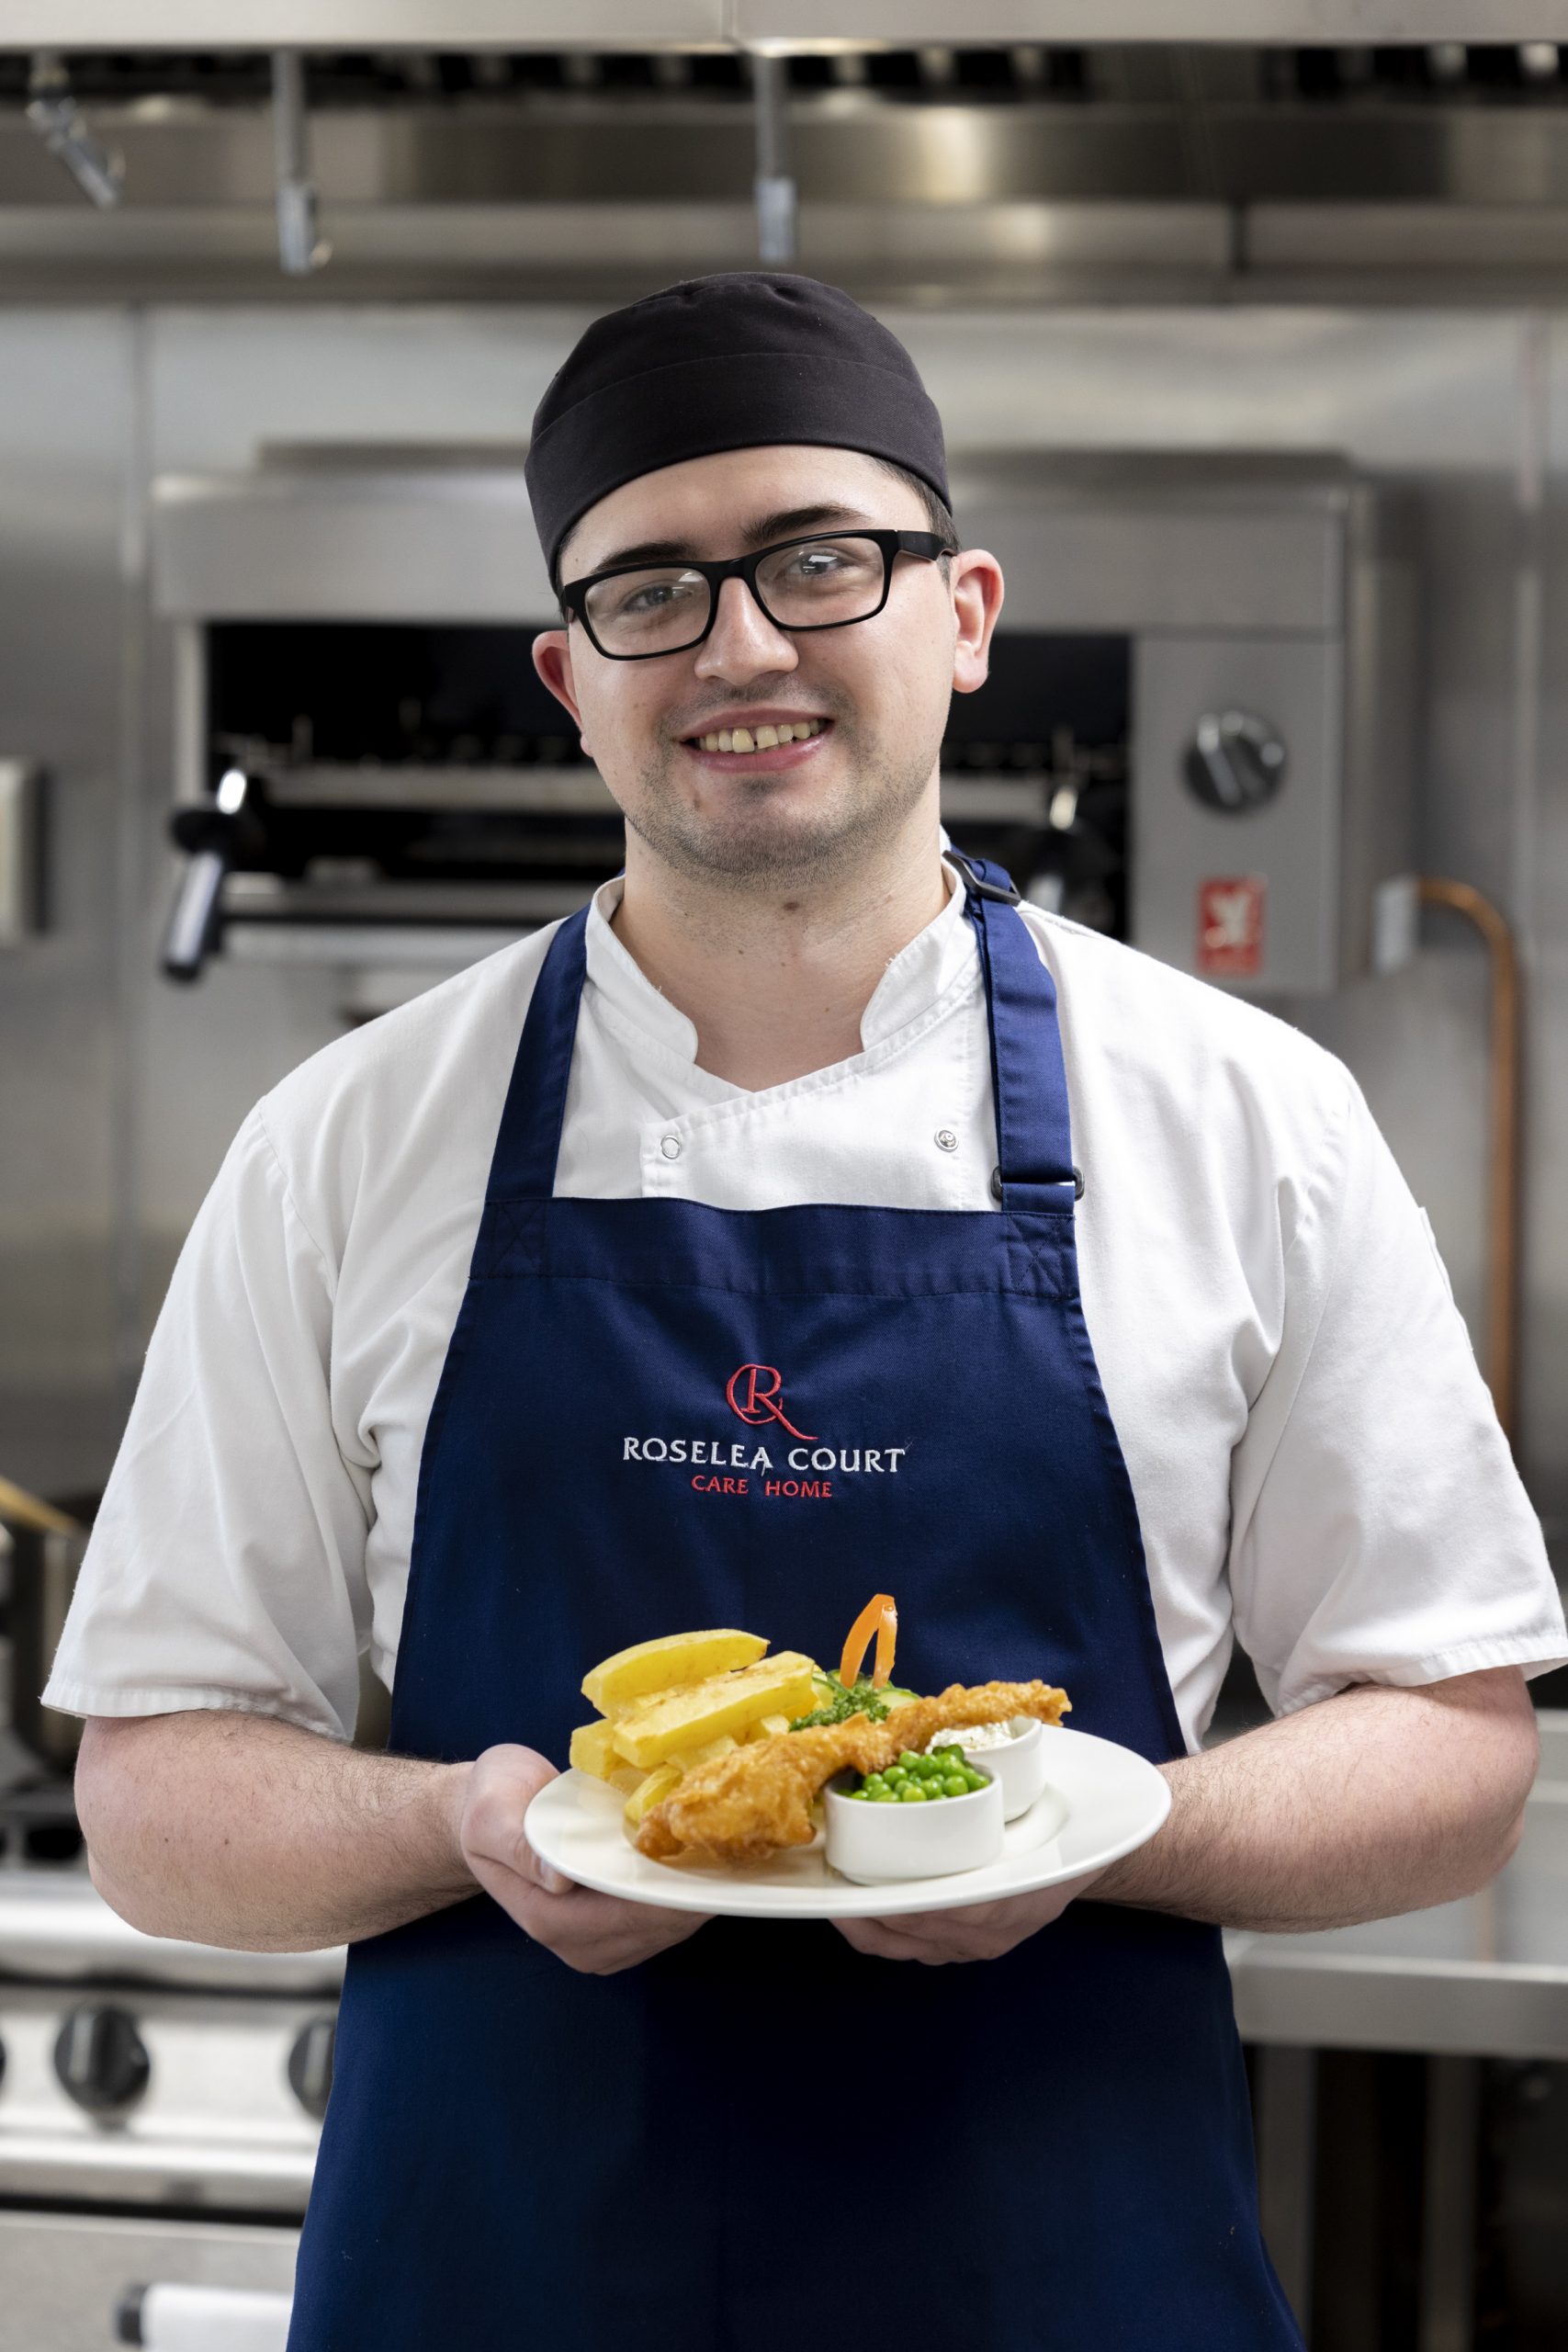 Chef Holding Fish & Chips